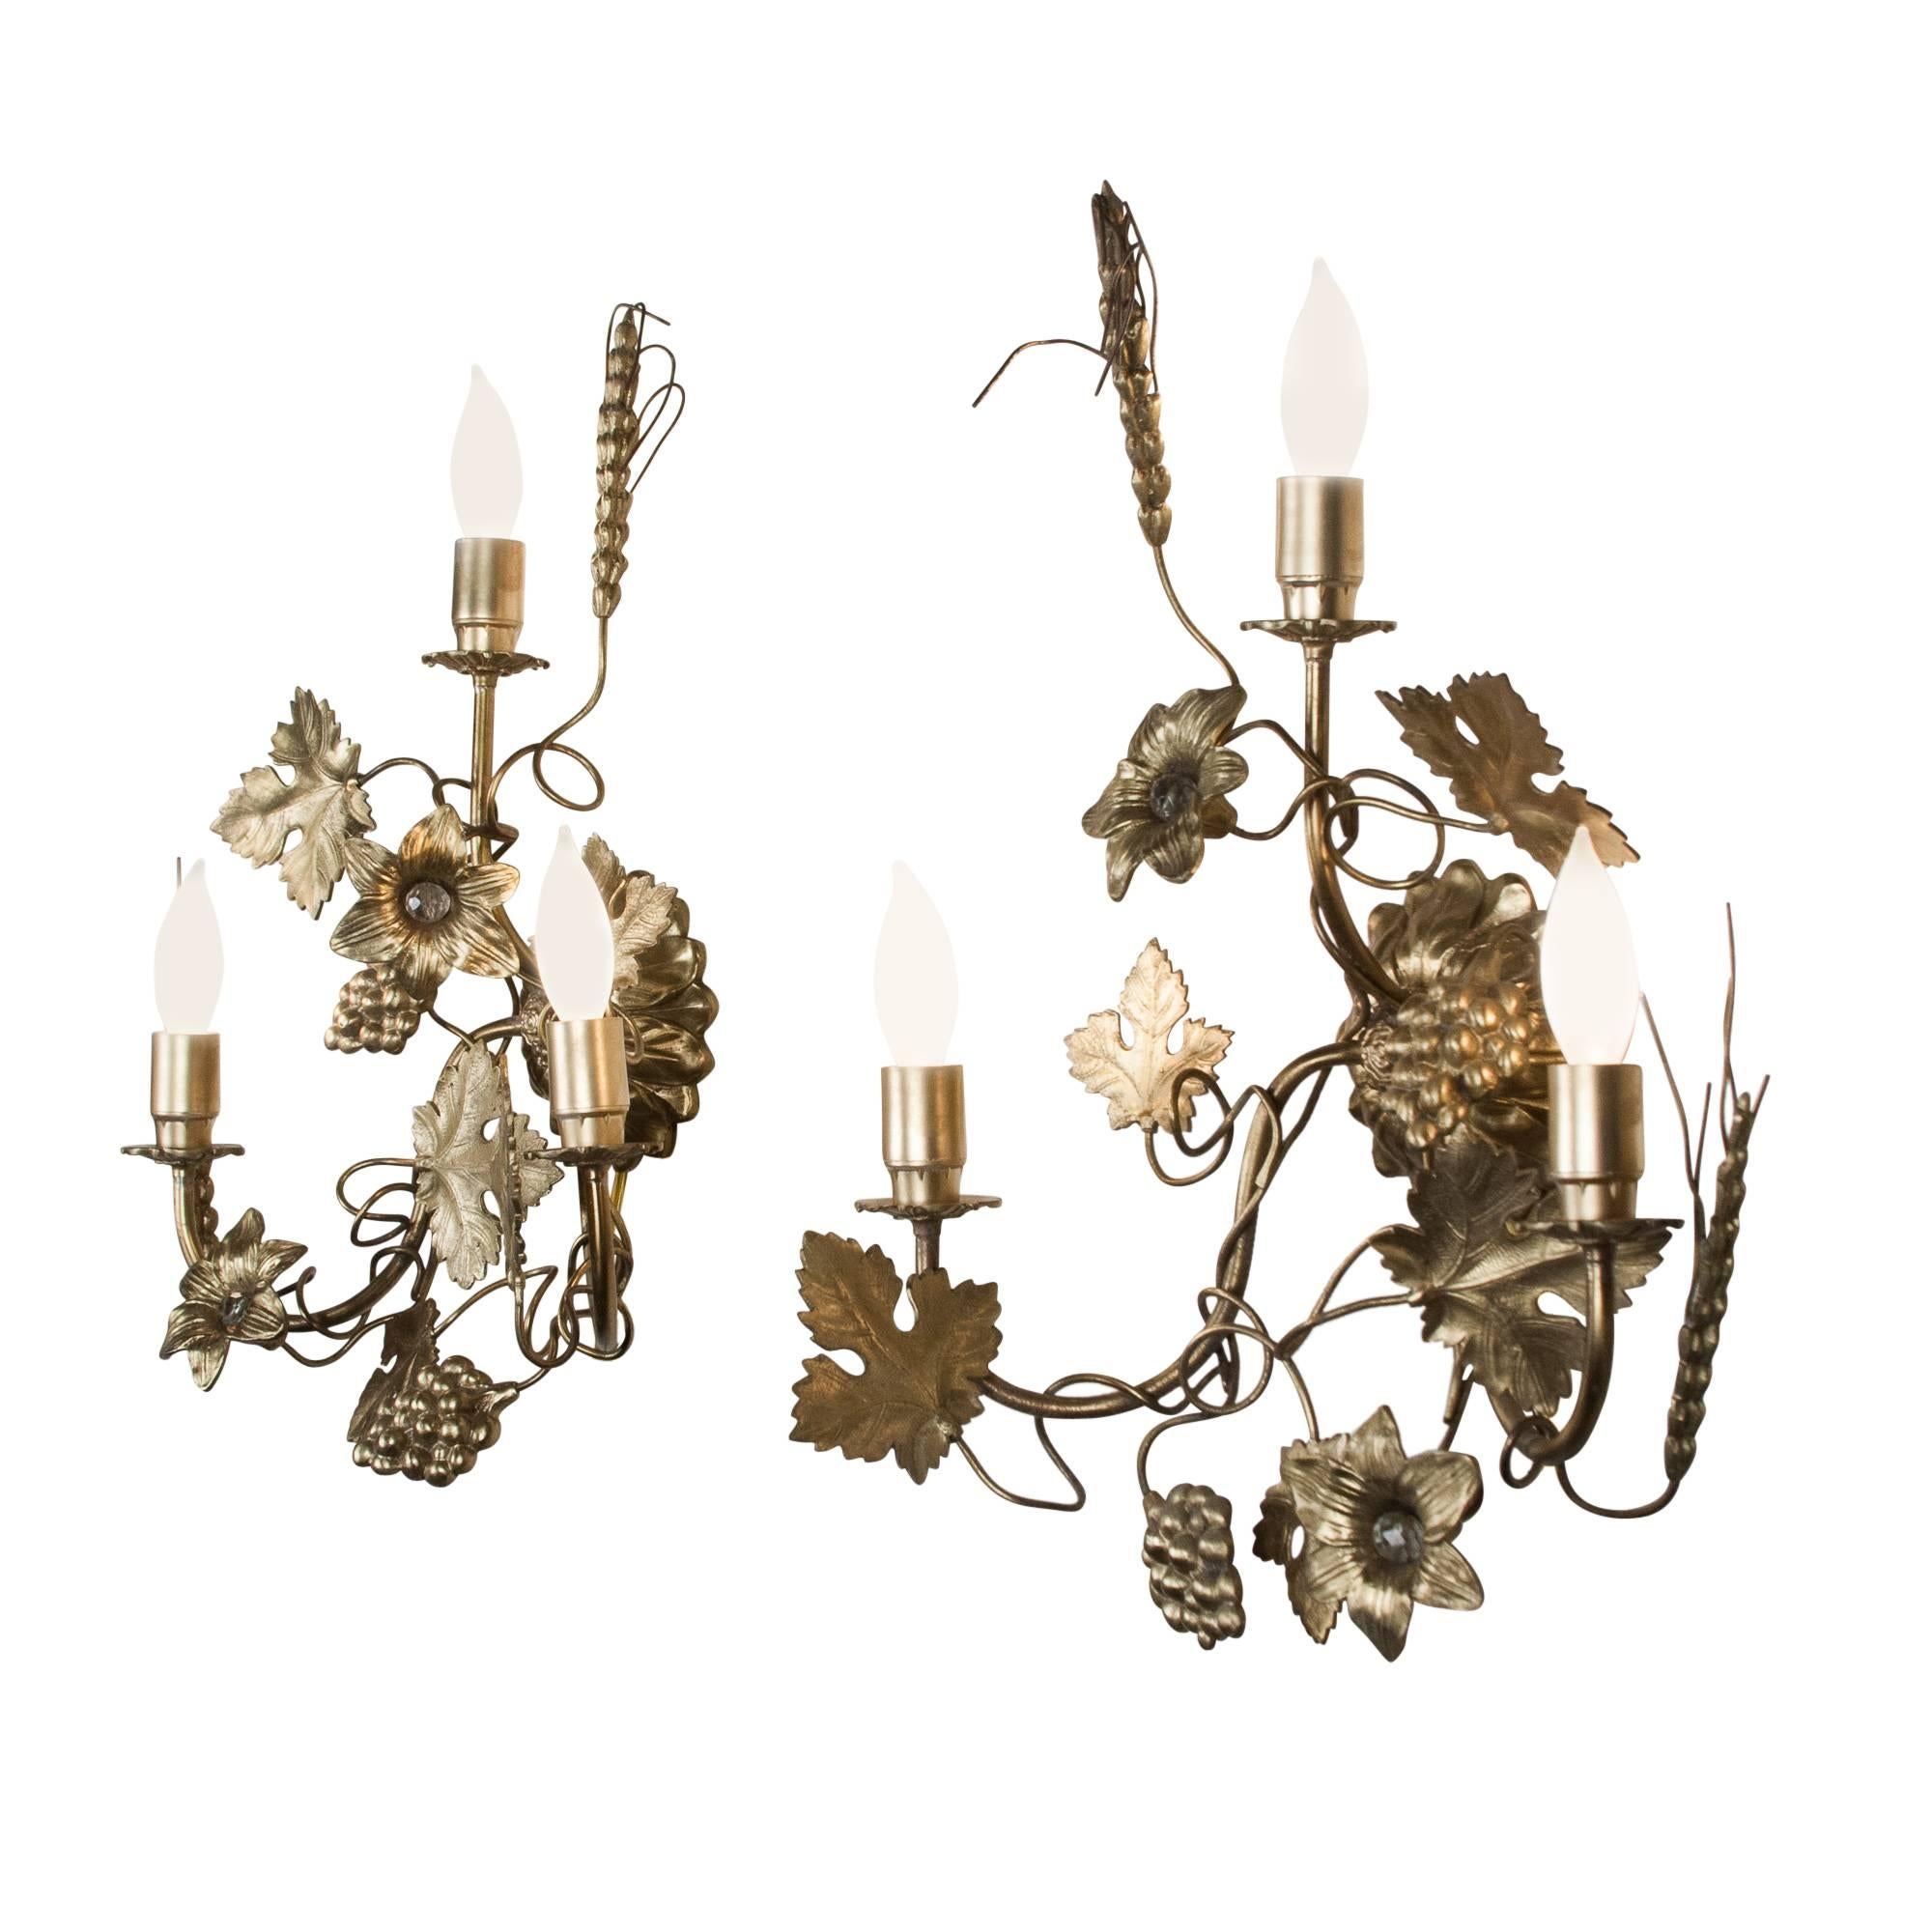 Pair of three-light gilded metal sconces, grape vine, flower and leaf ornamentation, French, 1960s. Measures: Height 17 in, width 13 in, depth 6 in. 